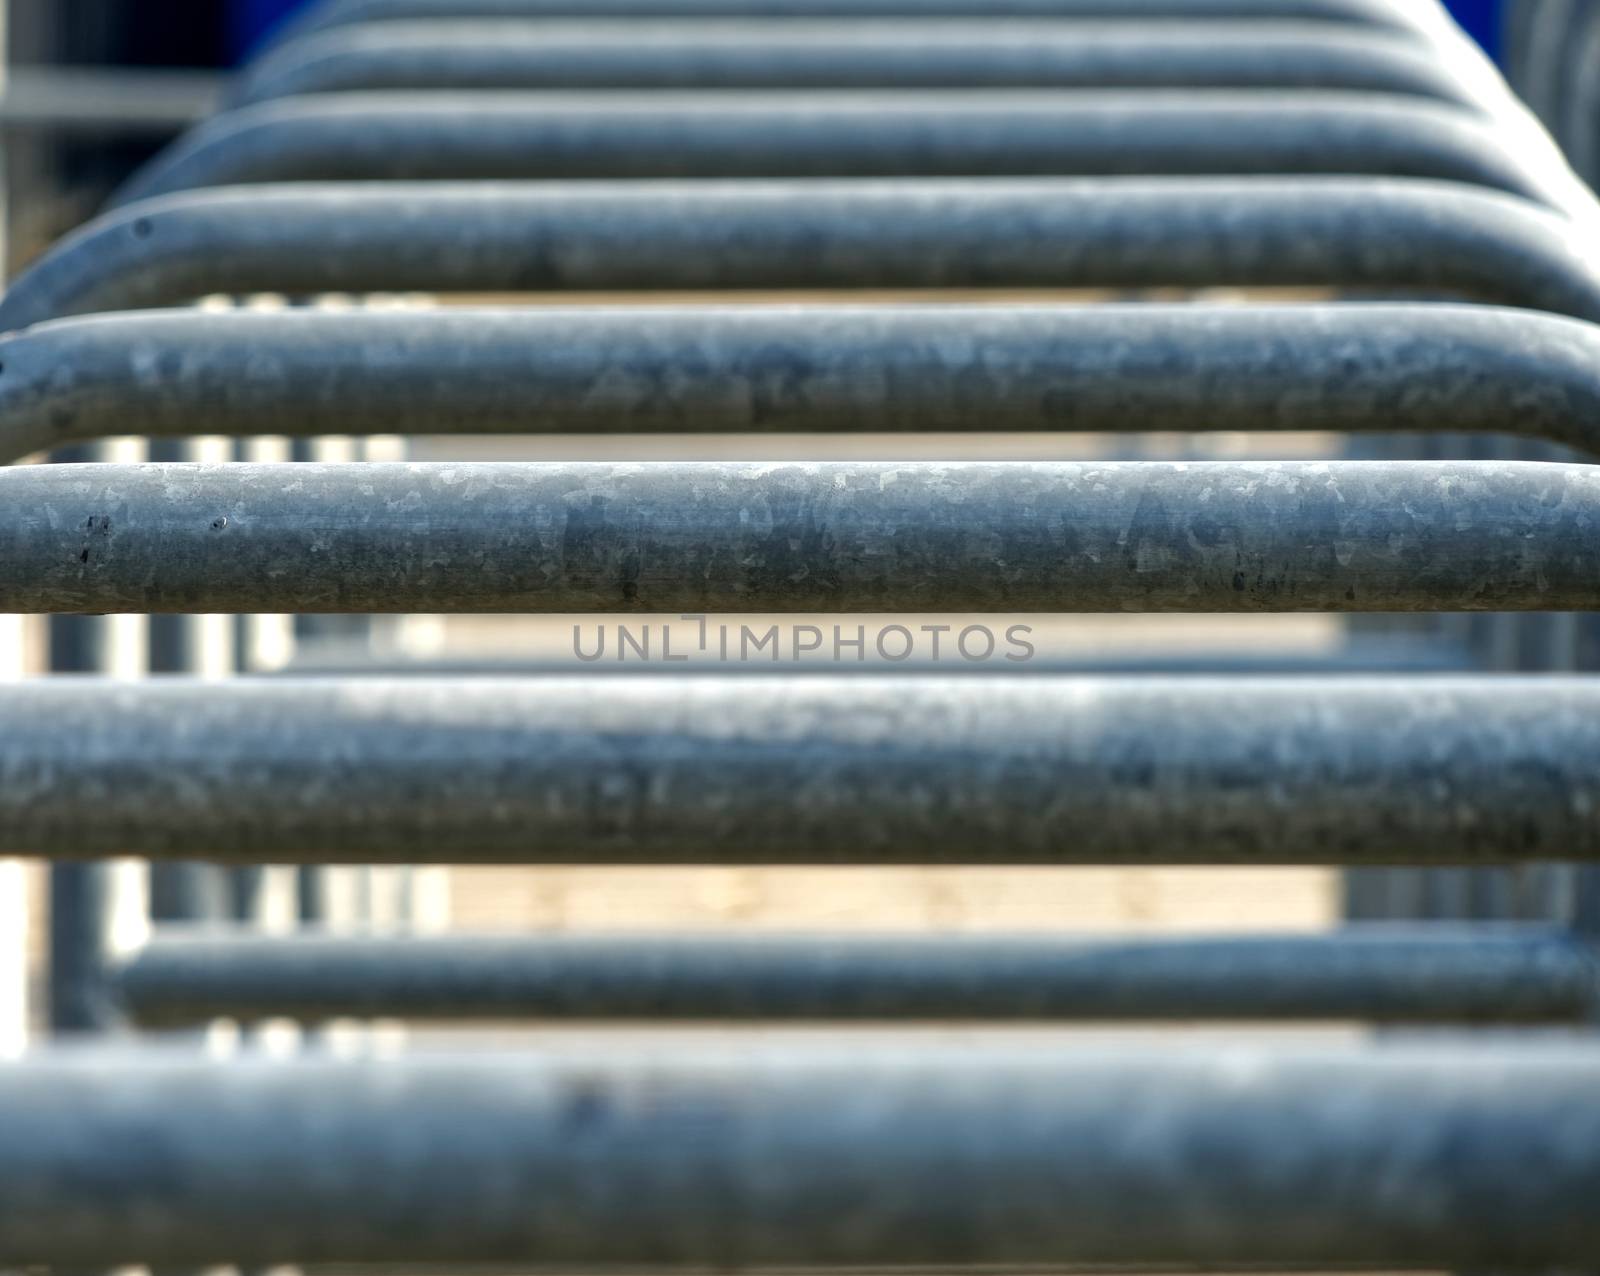 Abstract image with low depth of field (DOF) from the rows of entrances to an arena separated by metal brackets by geogif